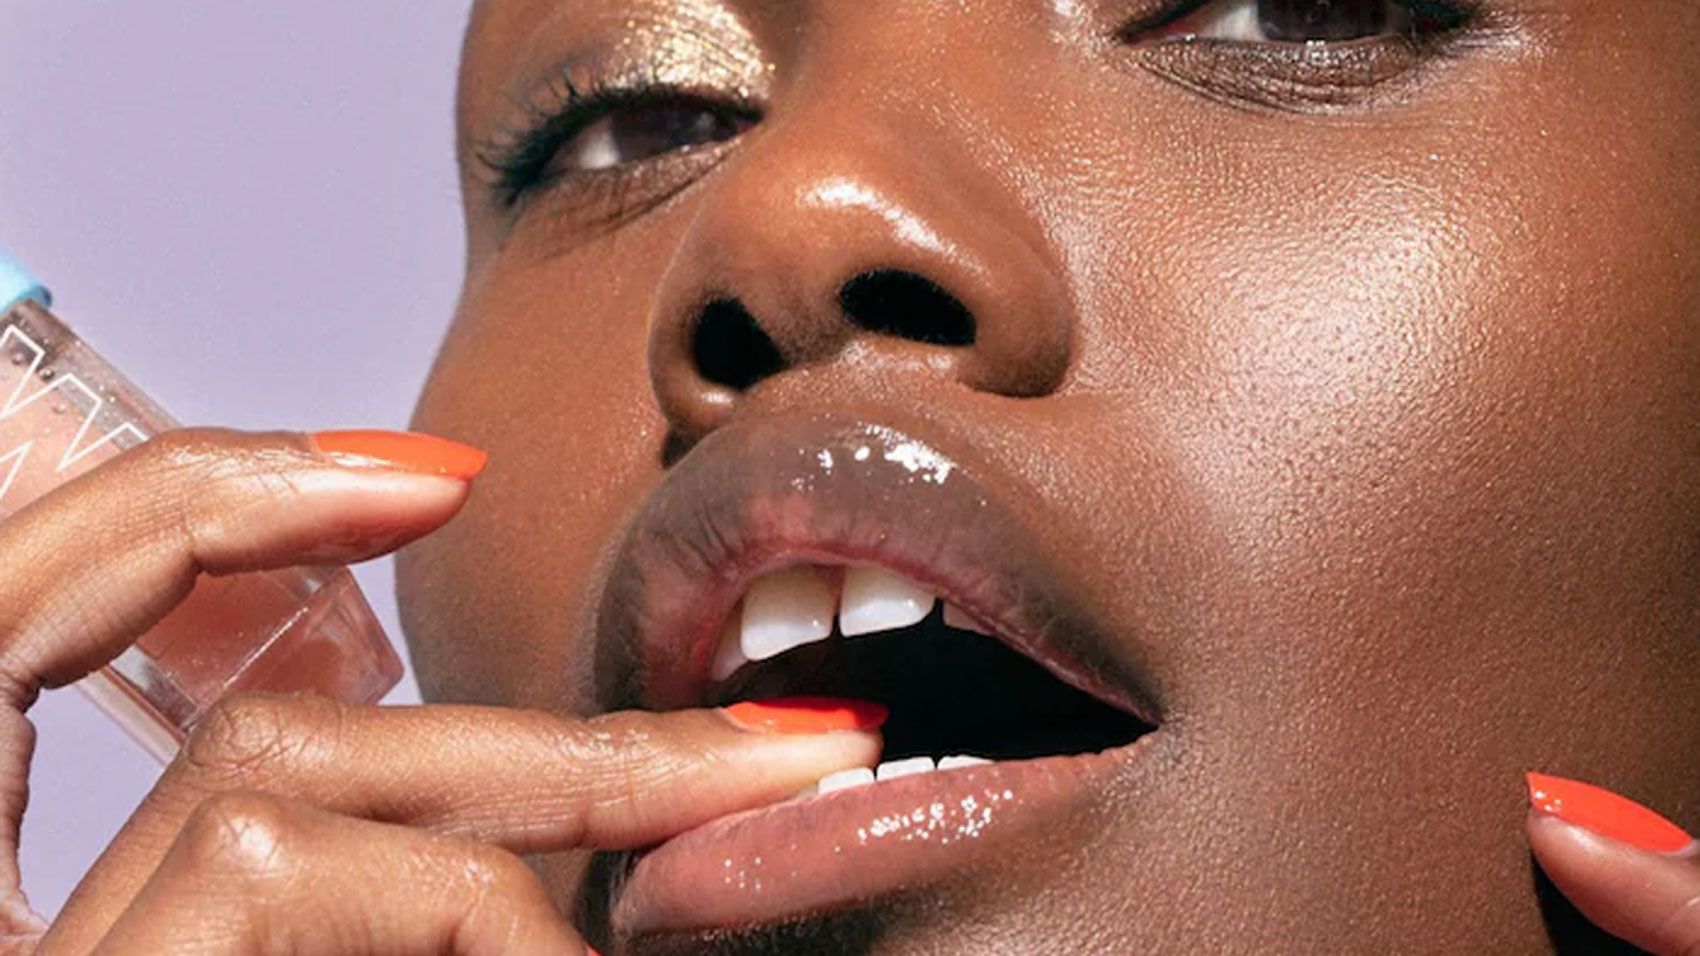 Every girl loves glitter right? Well now you can have glitter lips